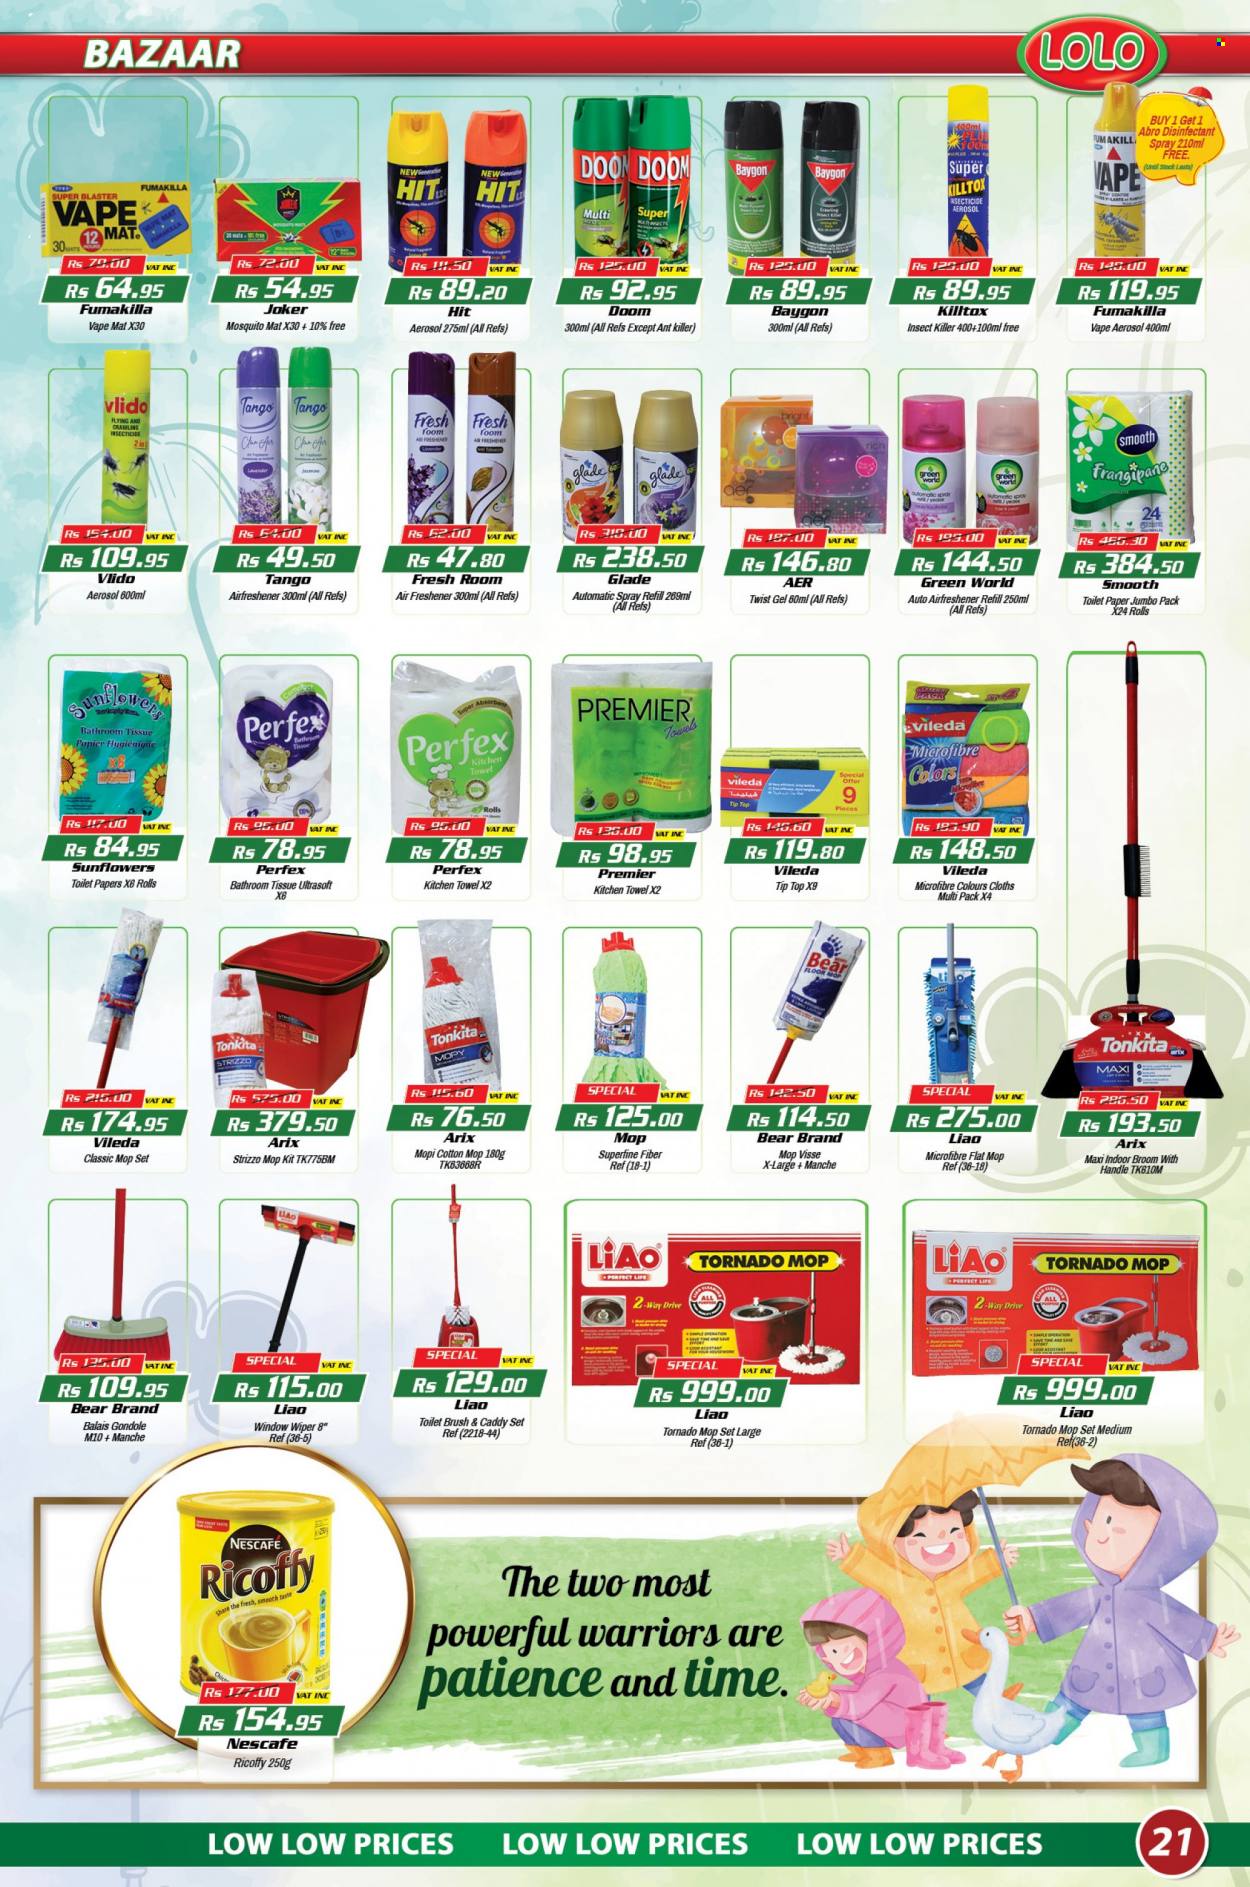 thumbnail - LOLO Hyper Catalogue - 26.01.2023 - 15.02.2023 - Sales products - Tip Top, Ricoffy, bath tissue, toilet paper, kitchen towels, antibacterial spray, insecticide, insect killer, Vileda, mop, broom, toilet brush, air freshener, Glade, Nescafé, desinfection. Page 21.